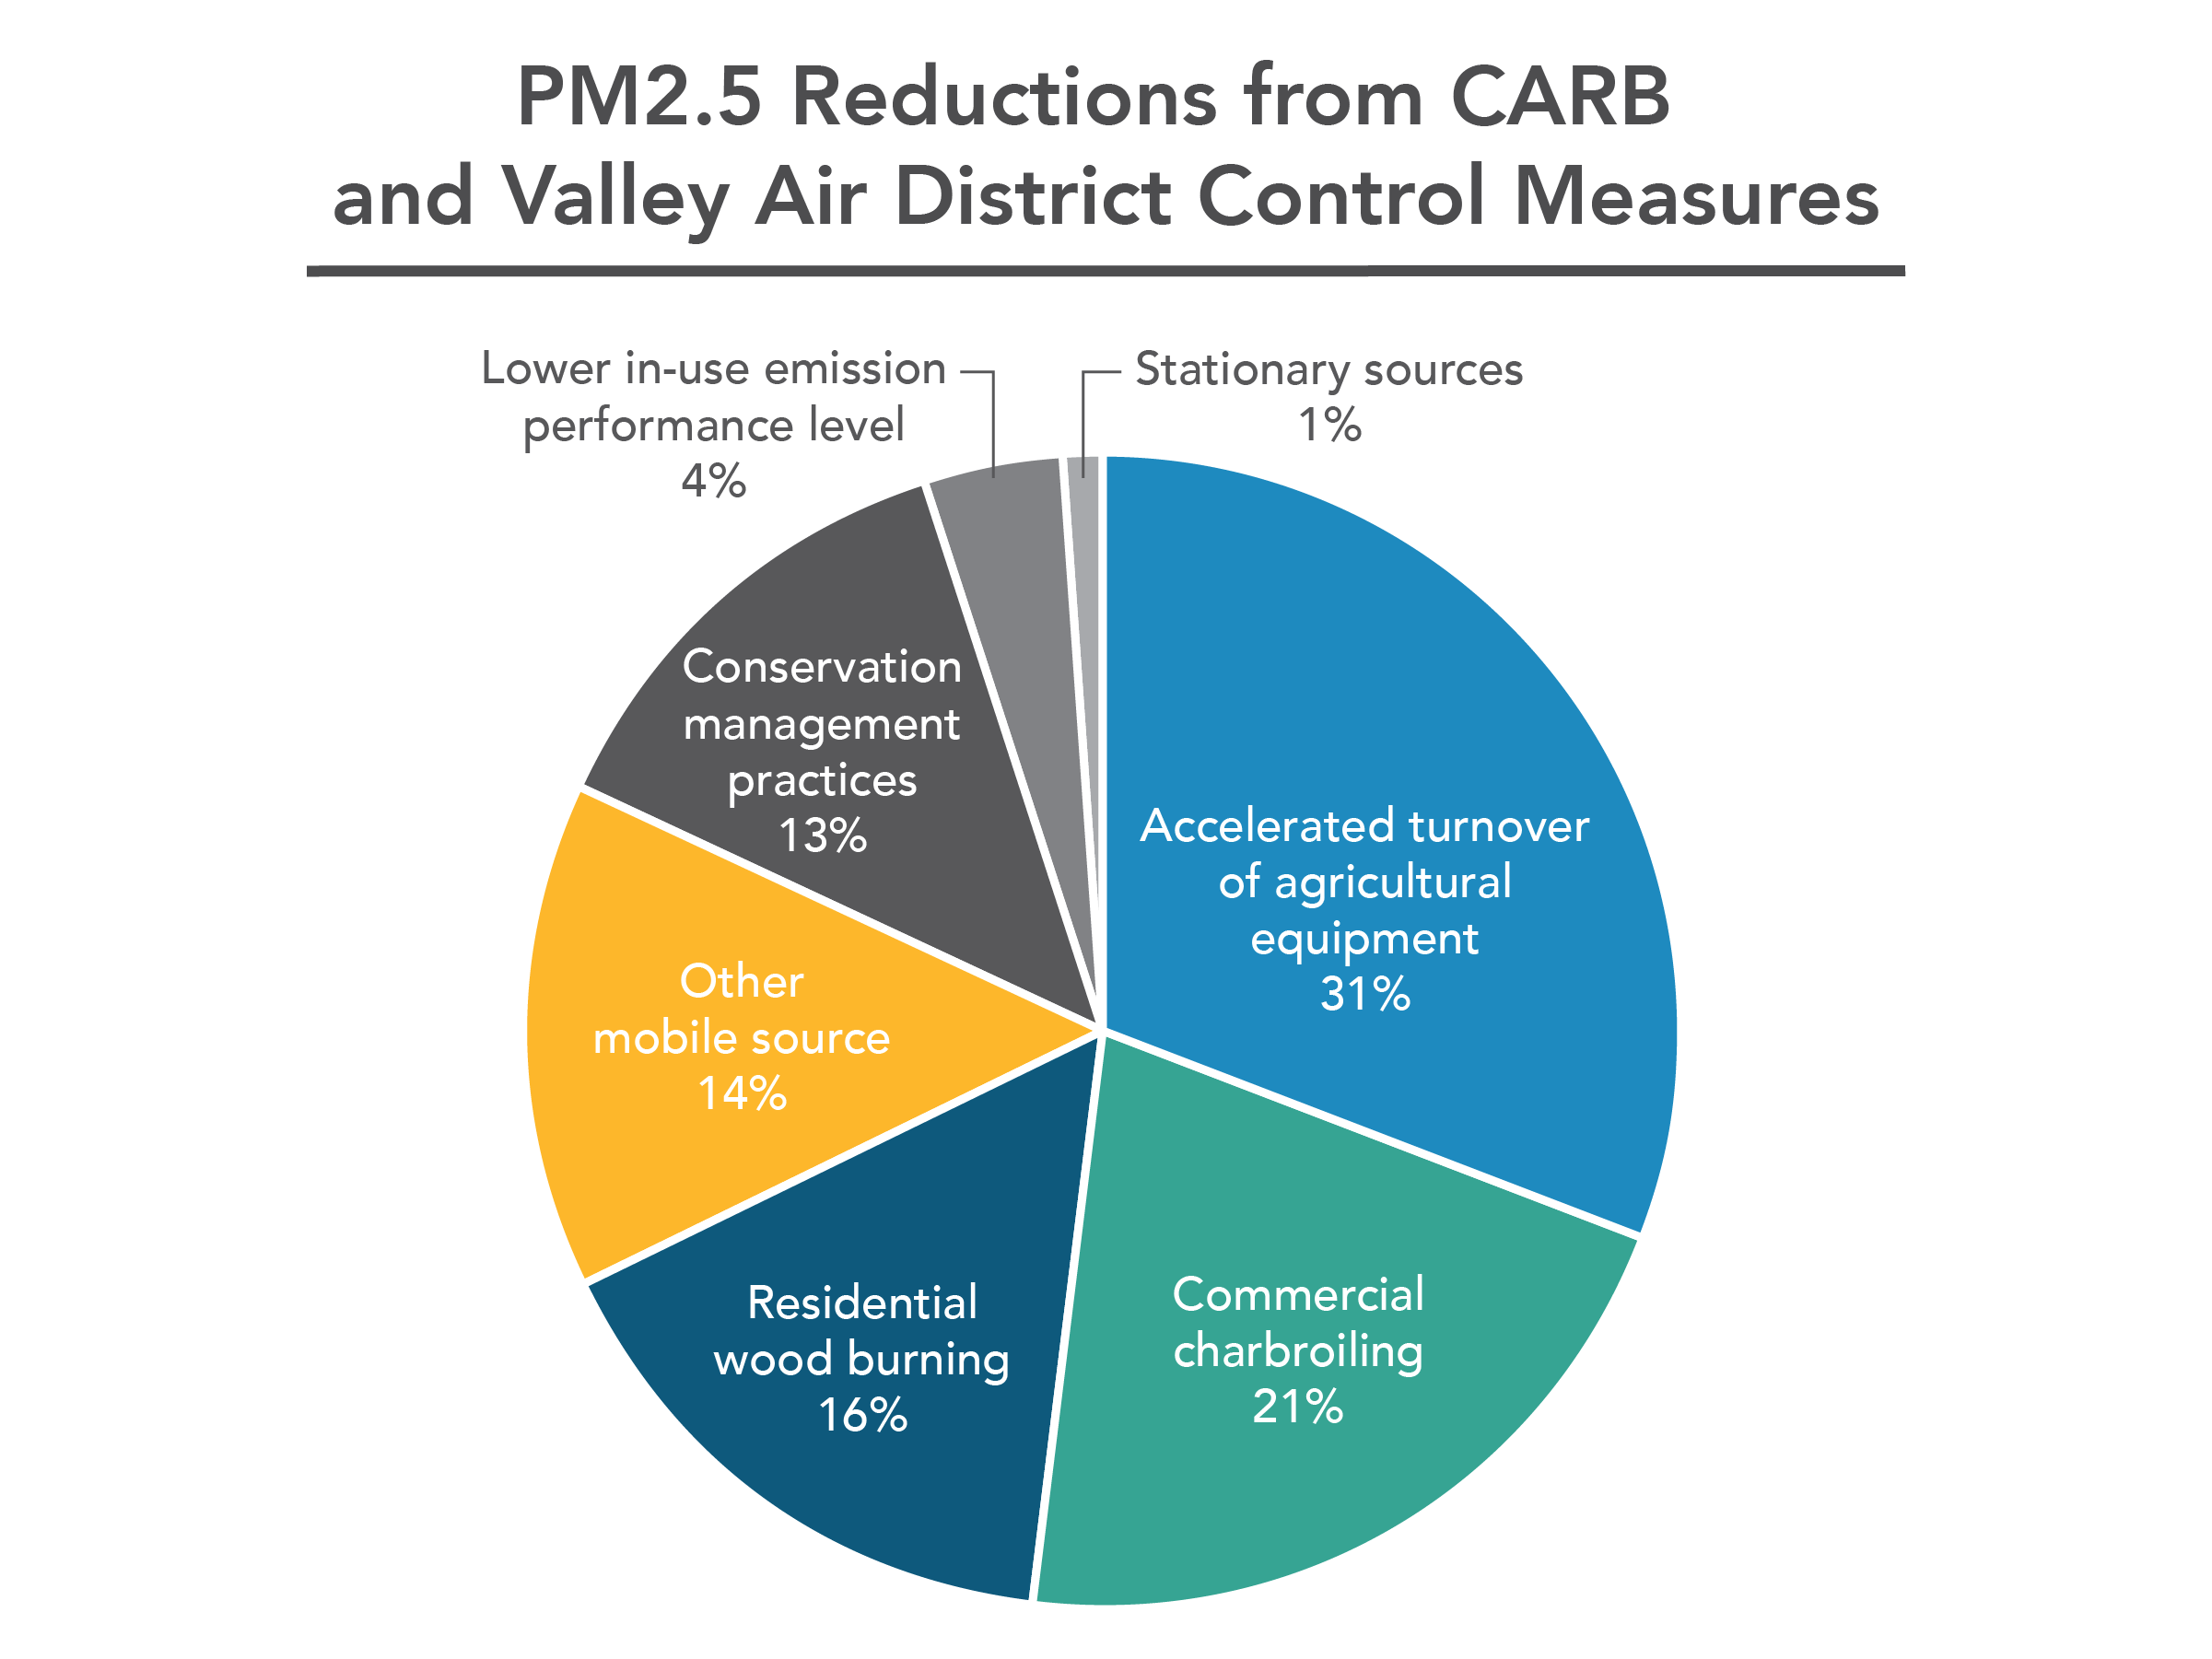 PM2.5 Reductions from CARB and Valley Air District Control Measures